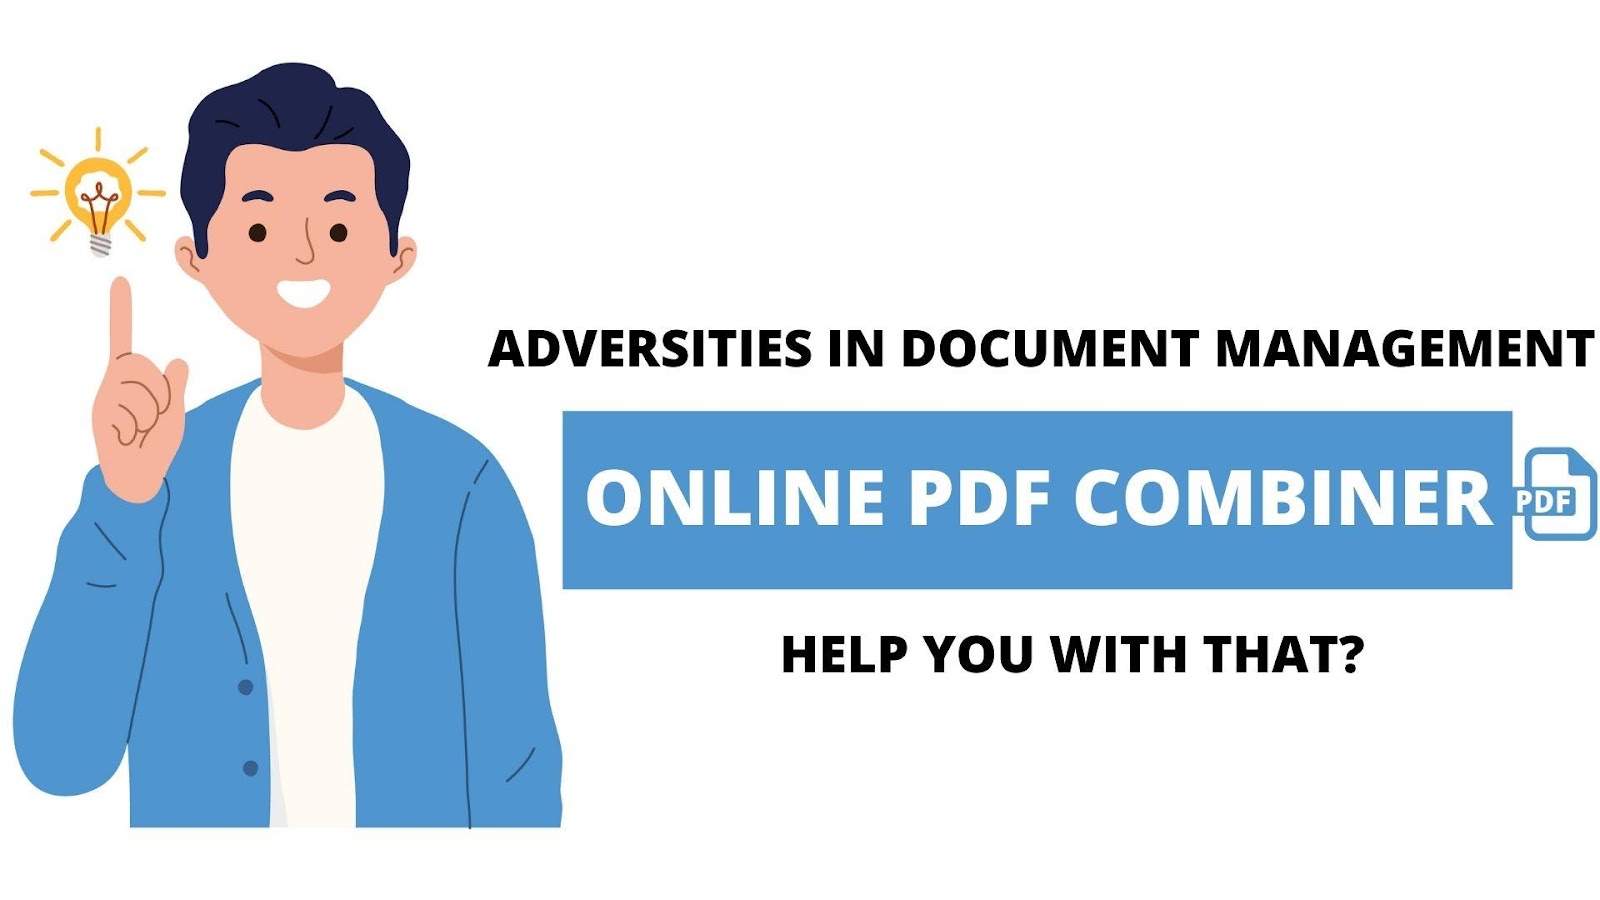 Adversities in Document Management  Can Online PDF Combiner Help You with That.jpg